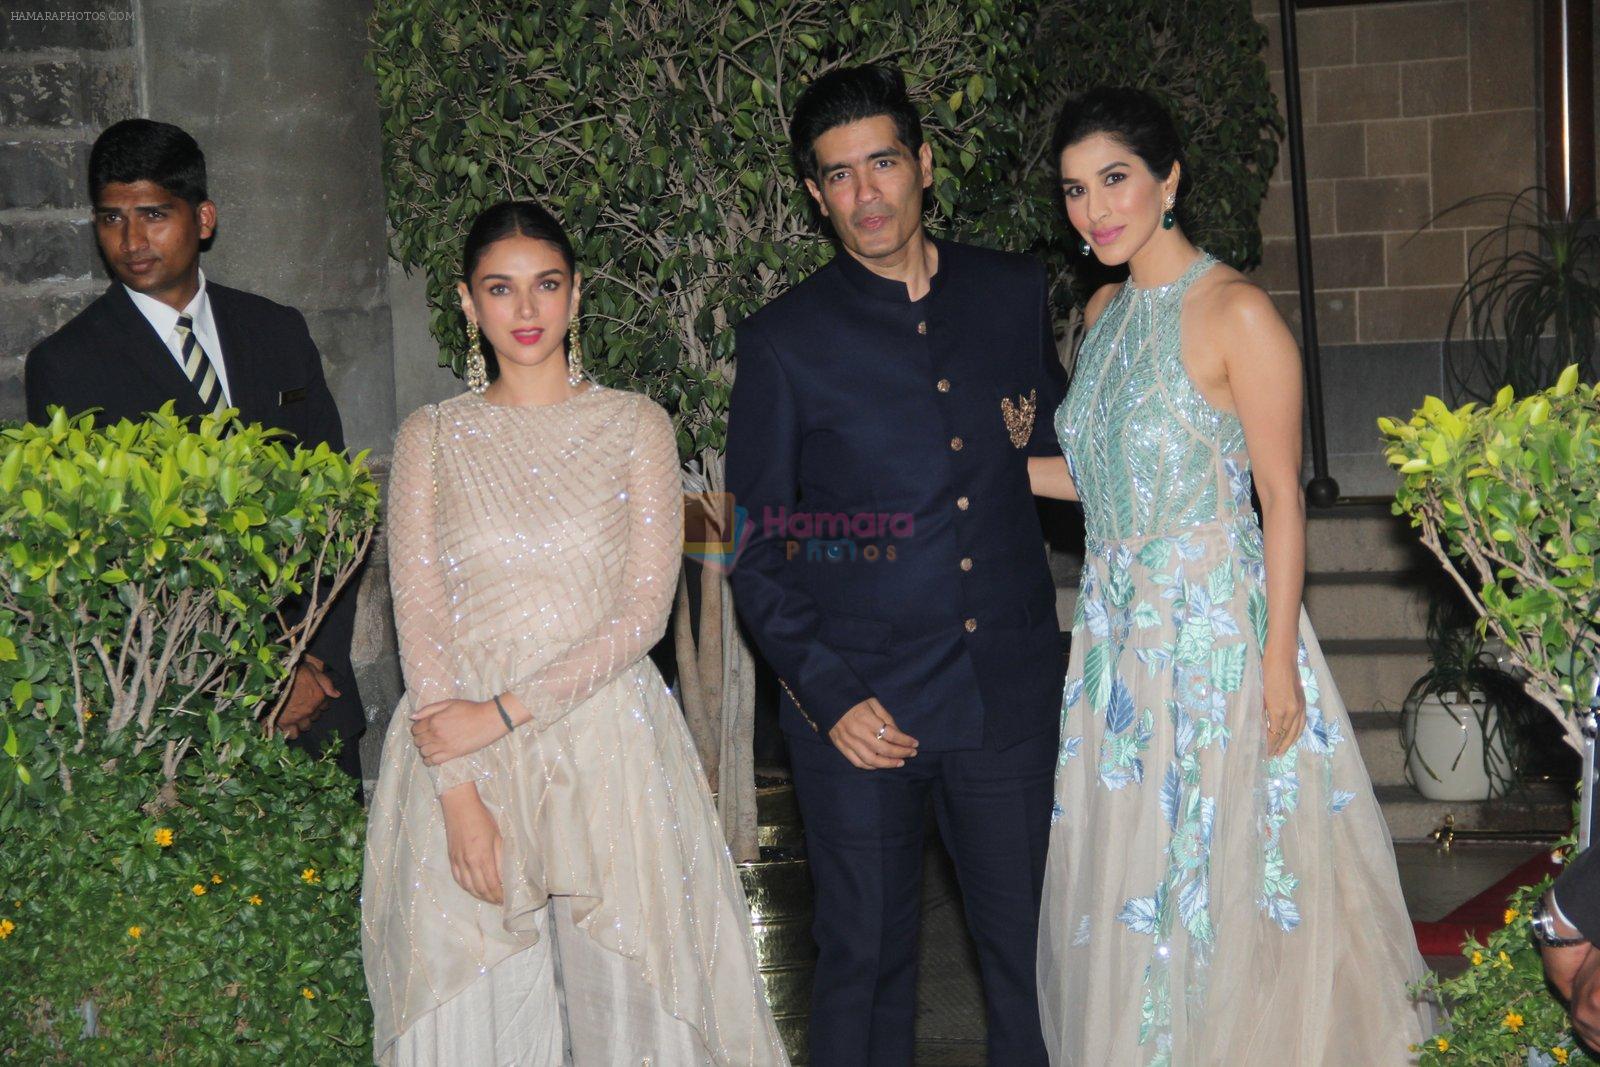 Aditi Rao Hydari at the Royal dinner by Prince William & Kate Middleton on 10th April 2016